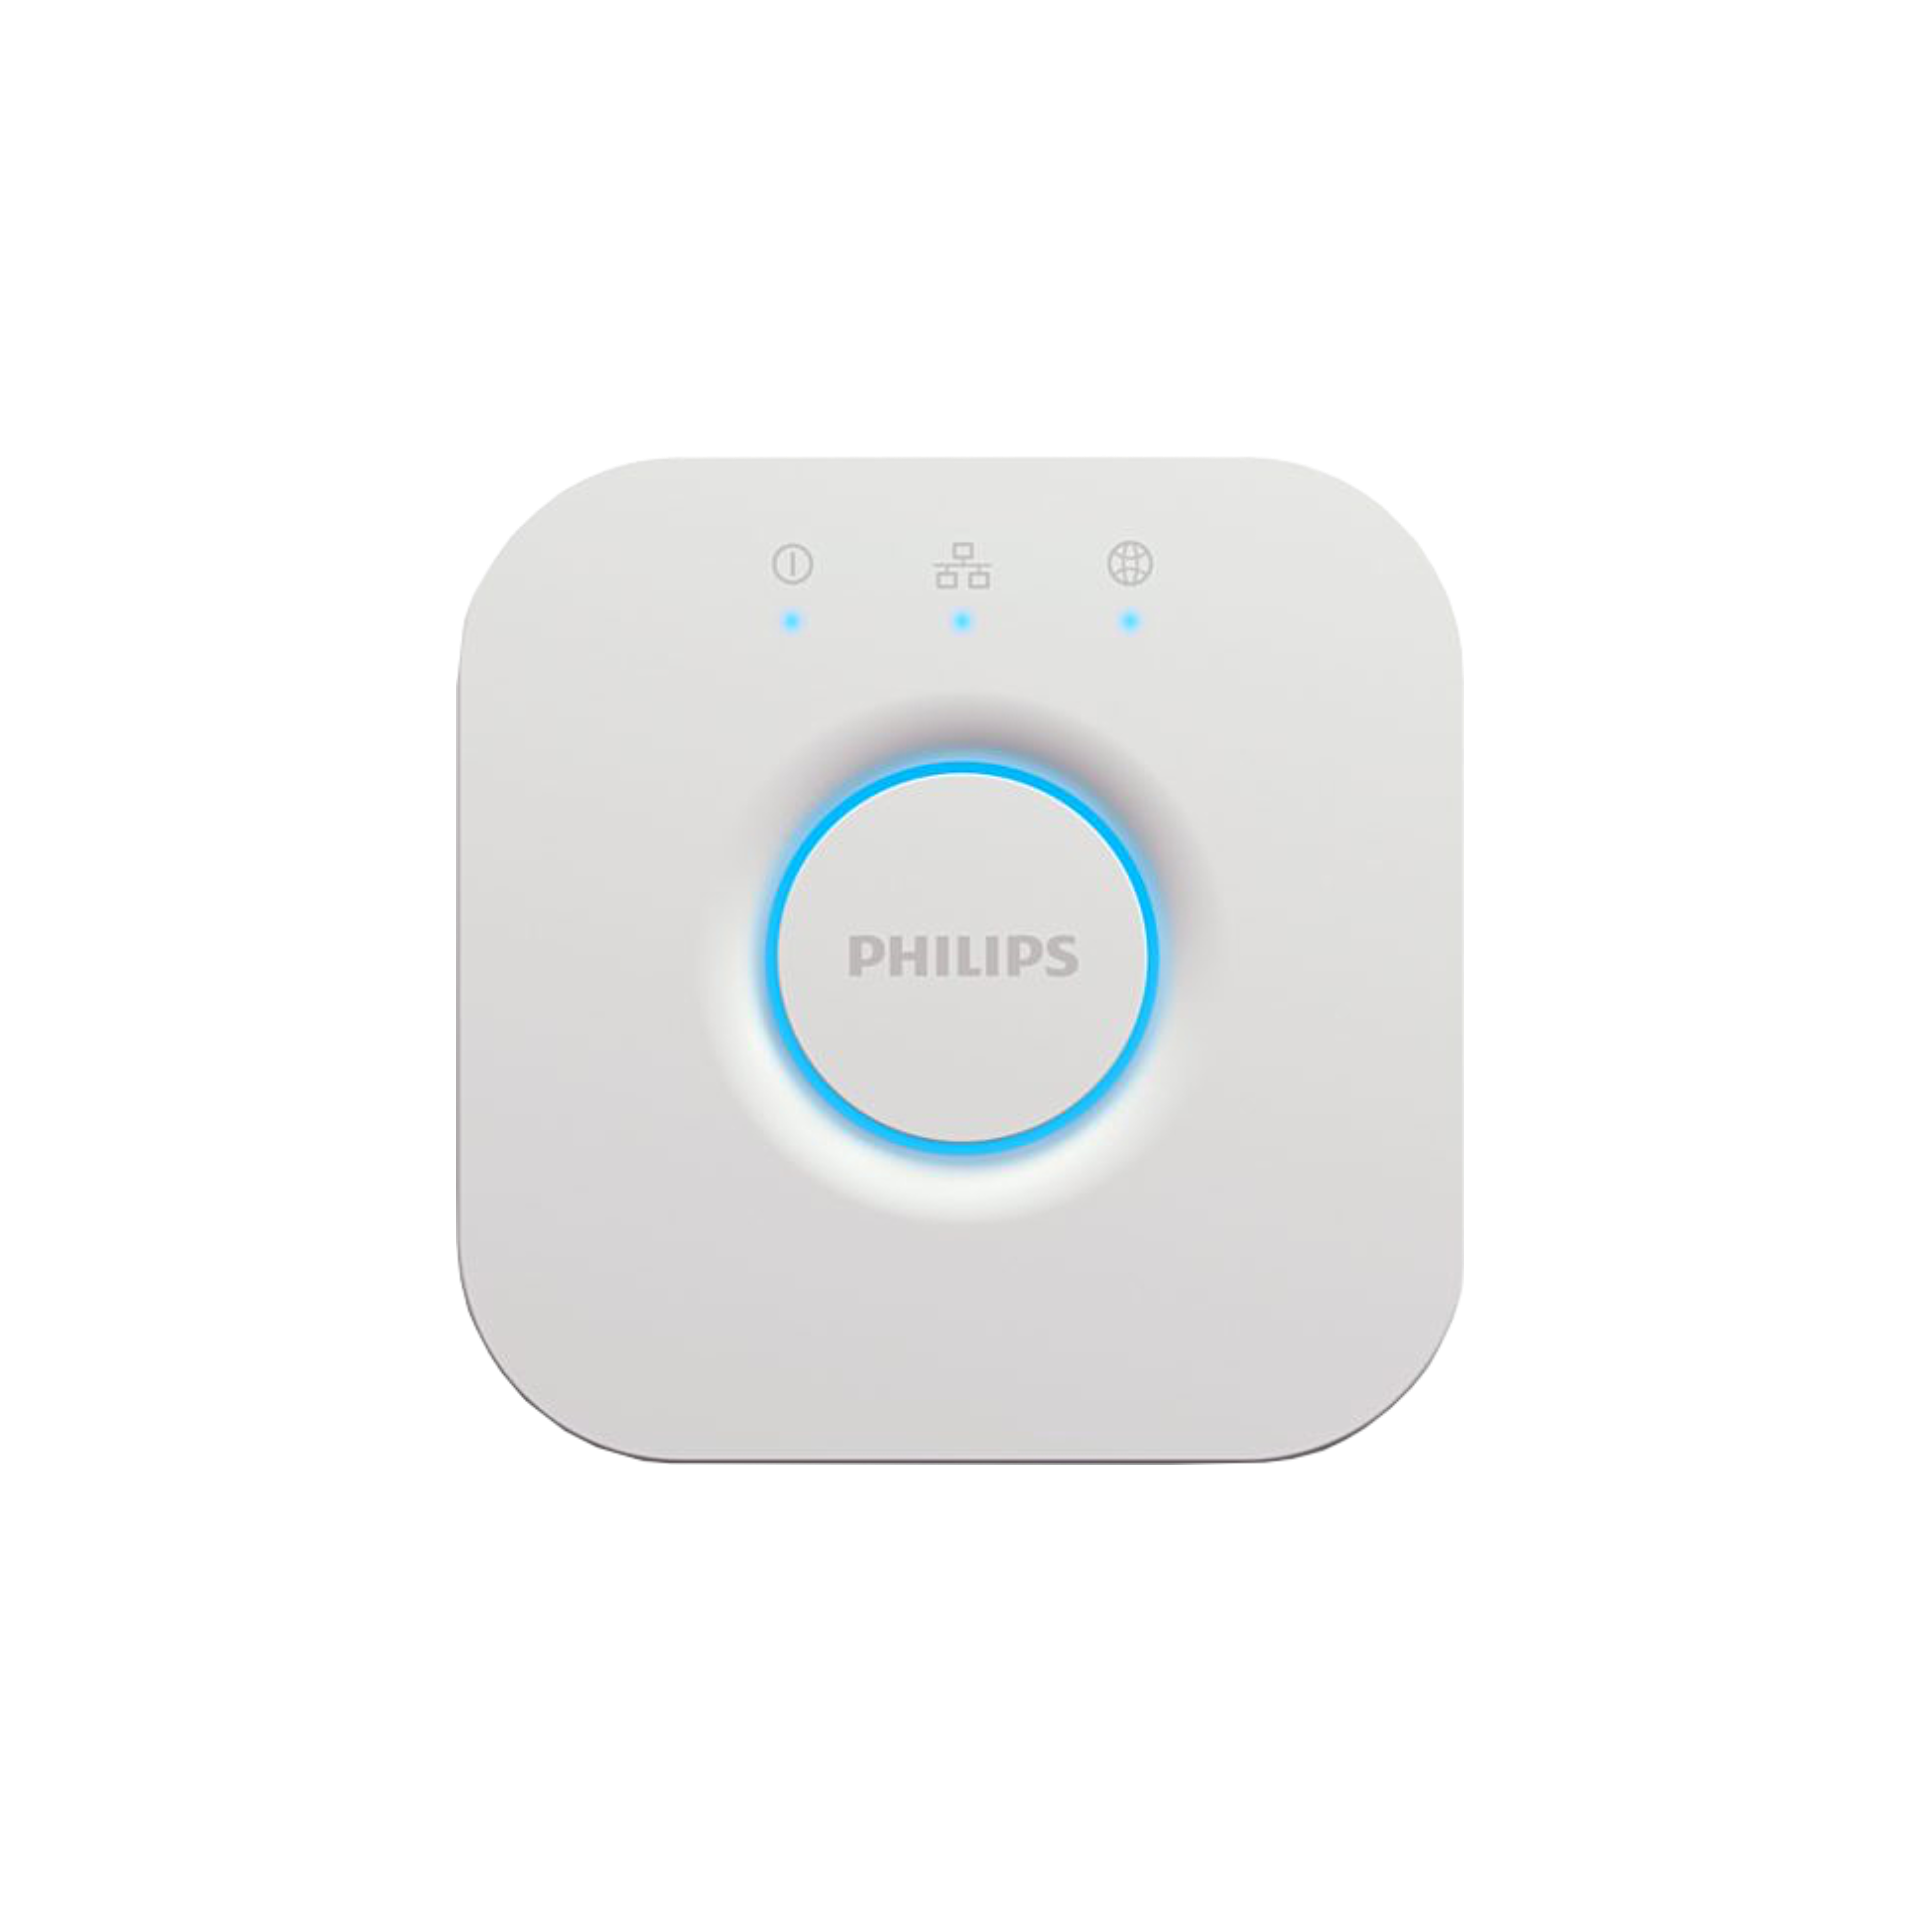 Philips Hue Bridge  central and intelligent control element of